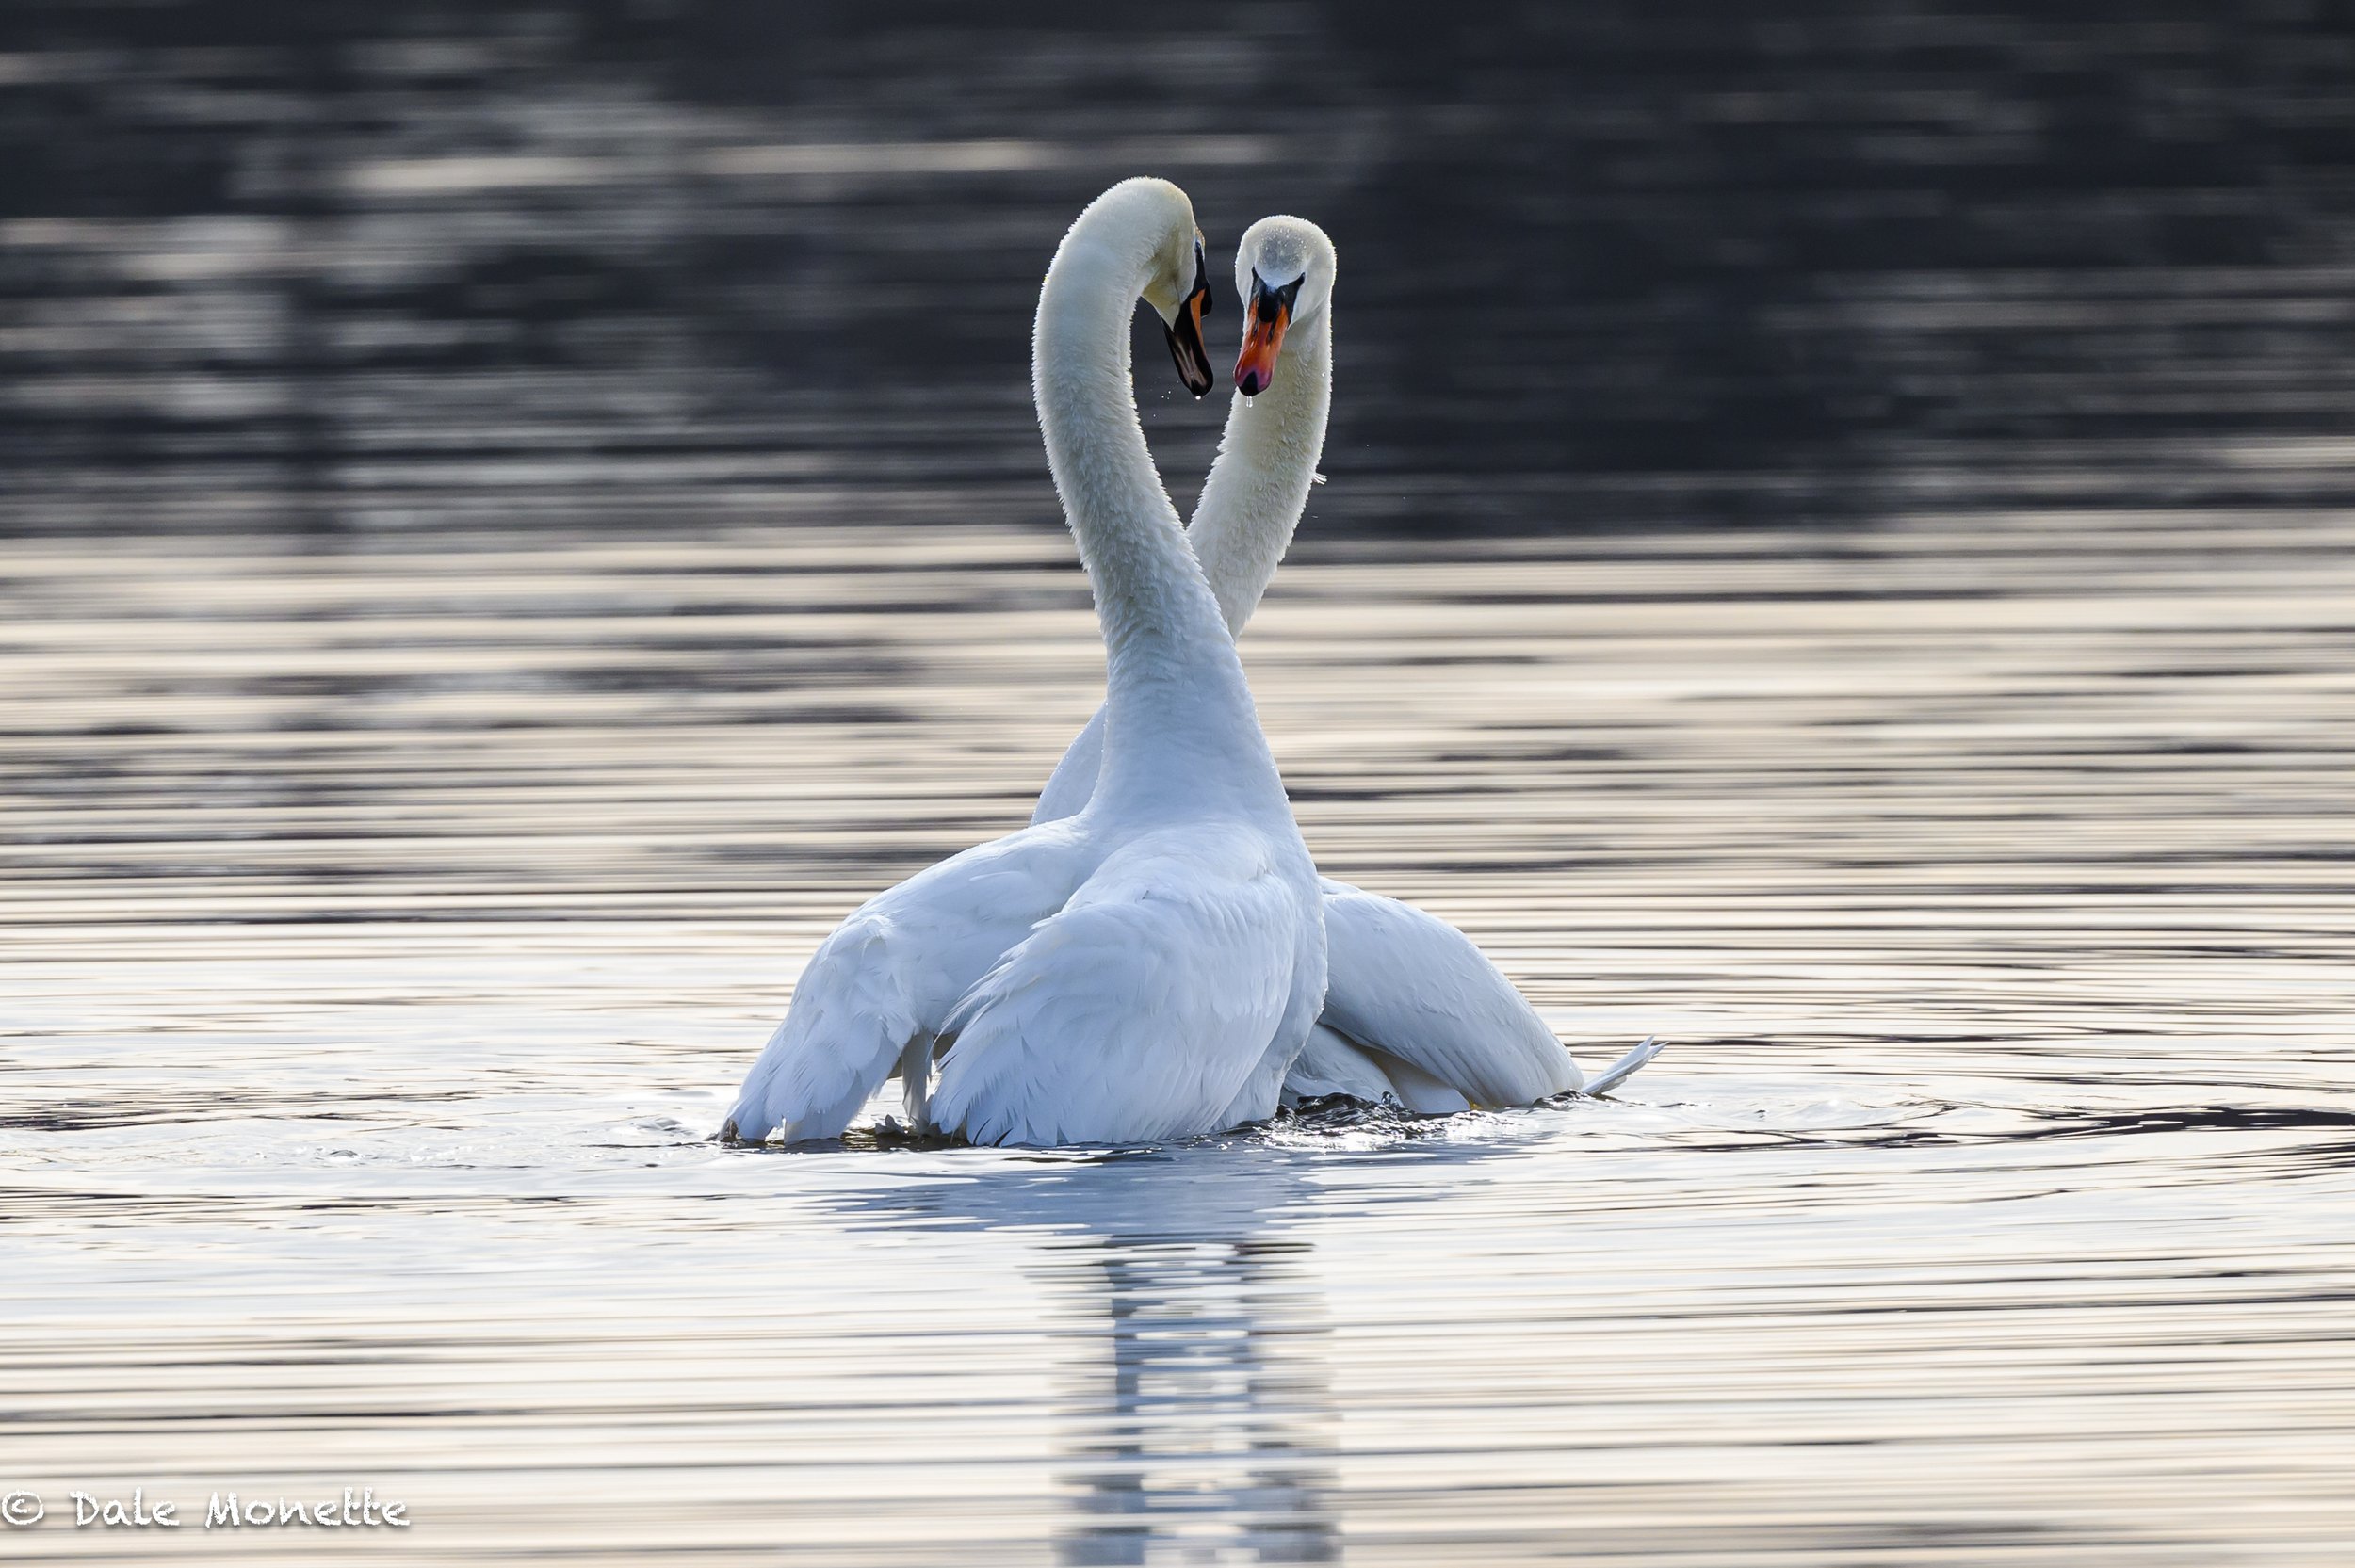   A pair of mute swans doing their mating dance on the Connecticut River in the early morning.  